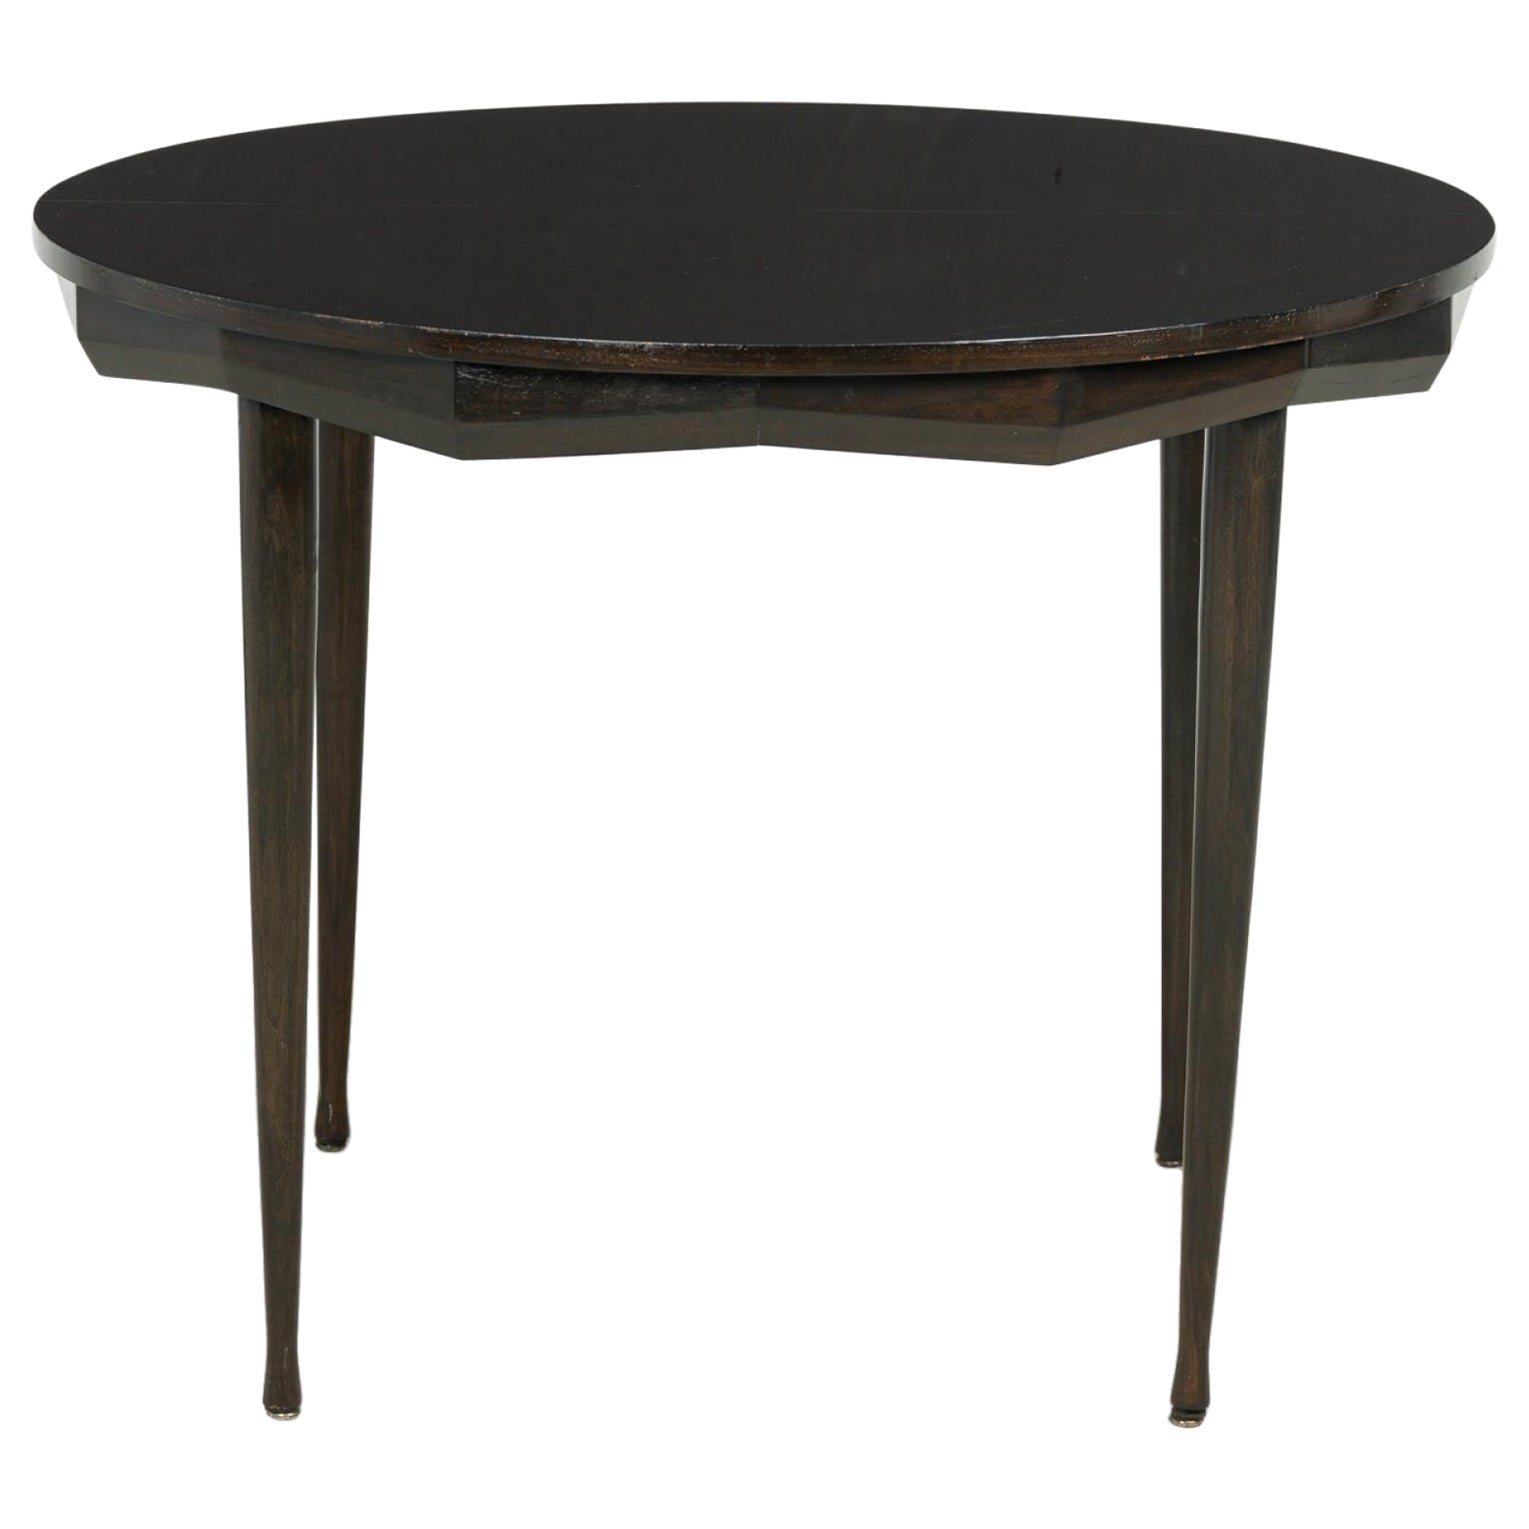 Ico Parisi Italian Mid-Century Circular Faceted Apron Dining / Center Table For Sale